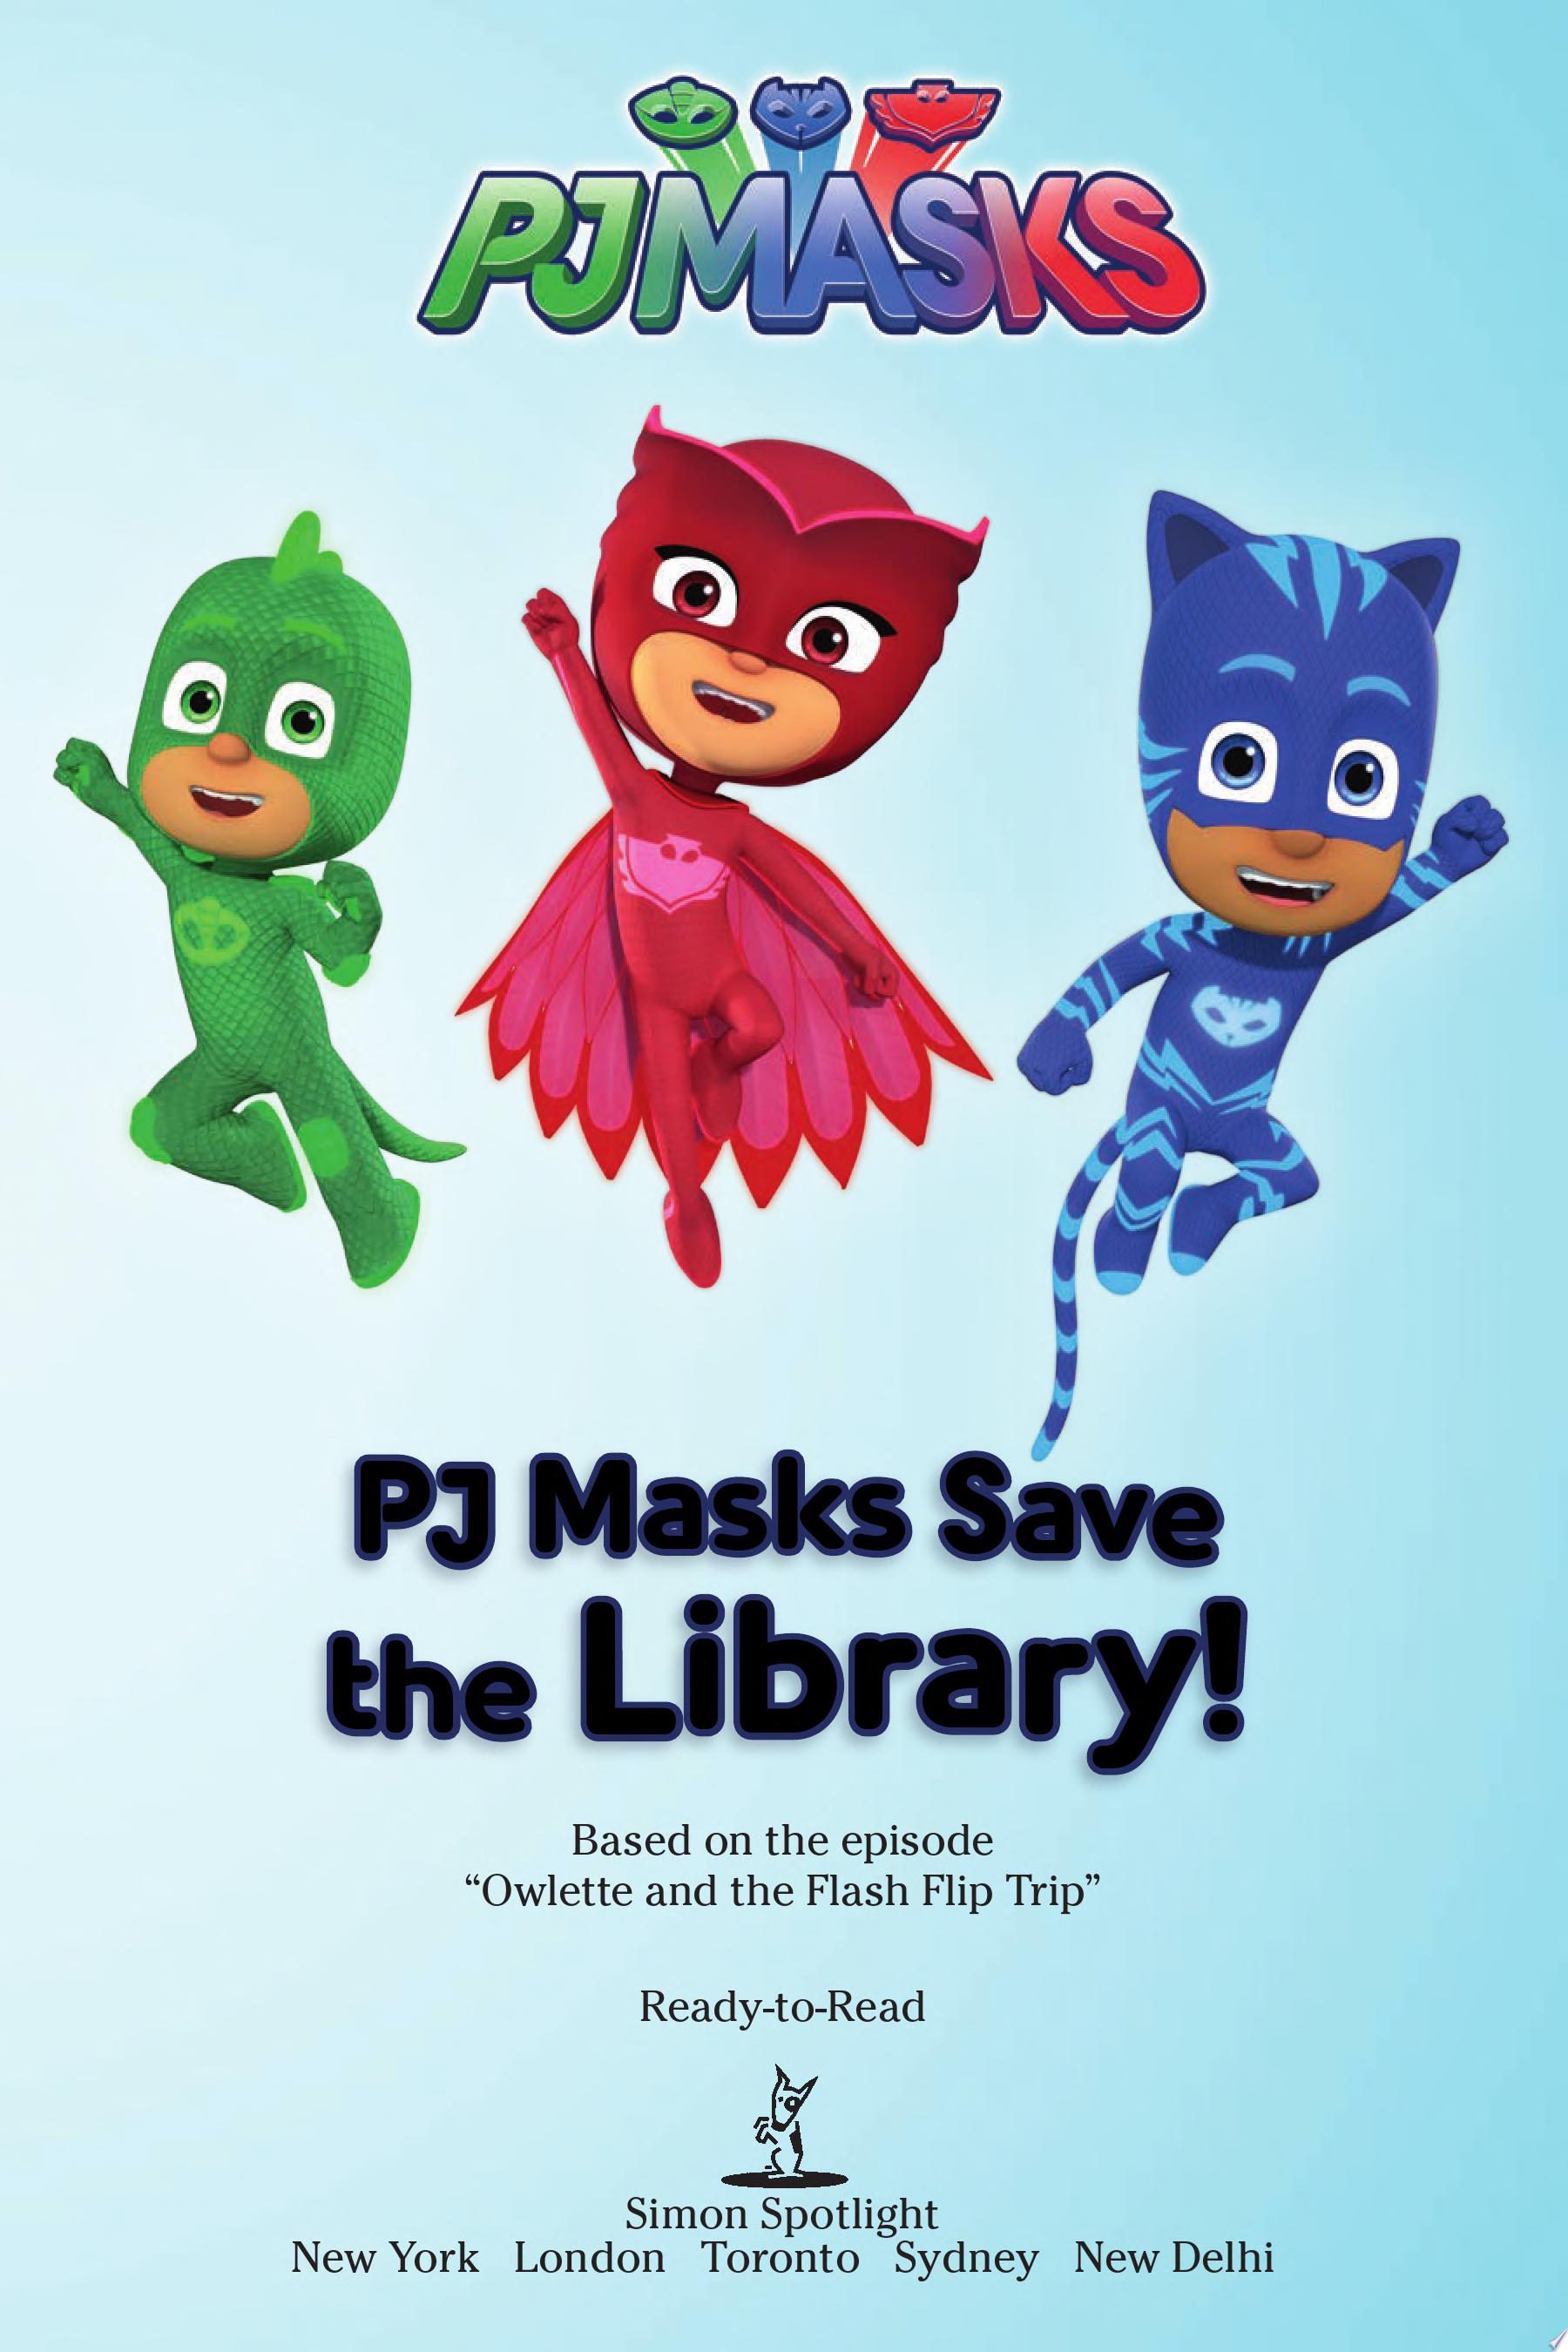 Image for "PJ Masks Save the Library!"